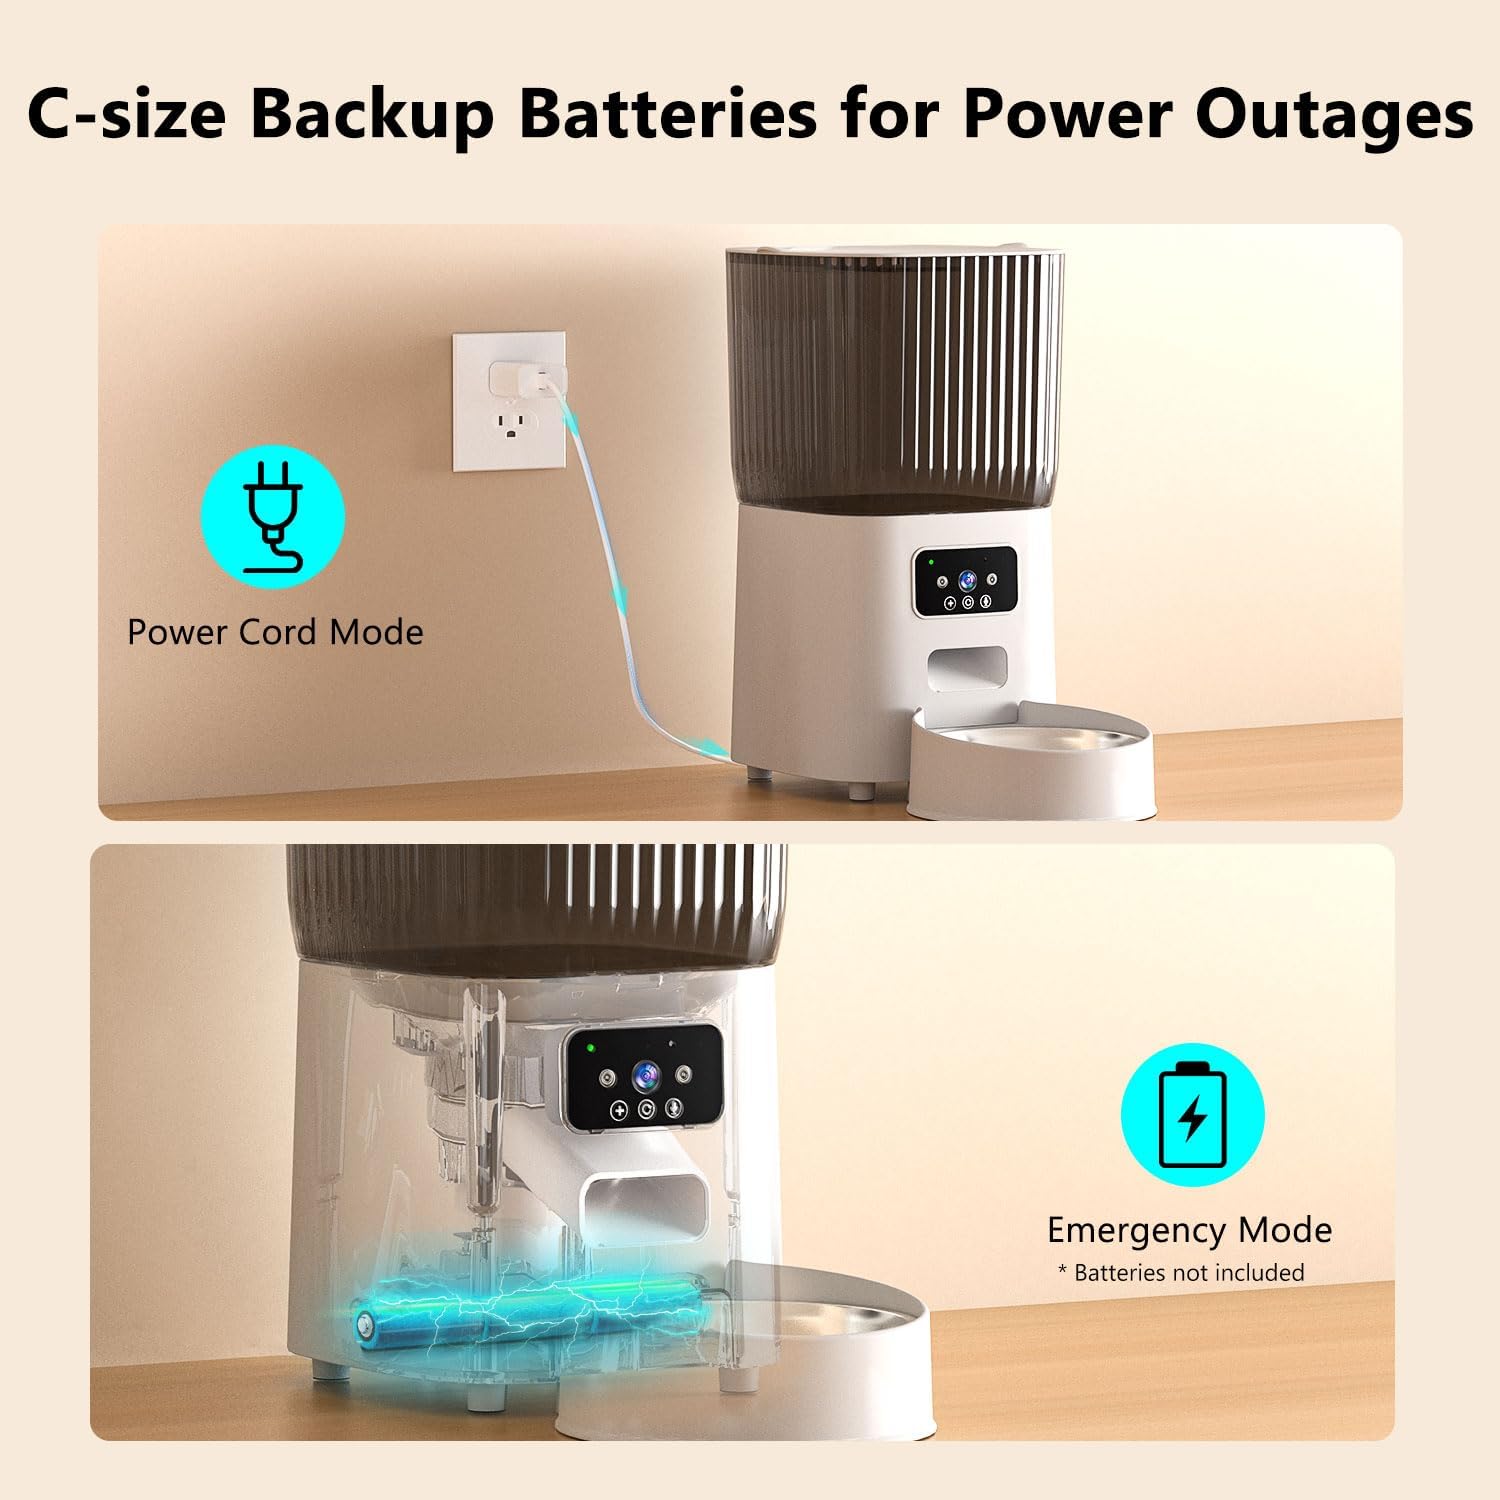 C-size Backup Batteries for Power Outages